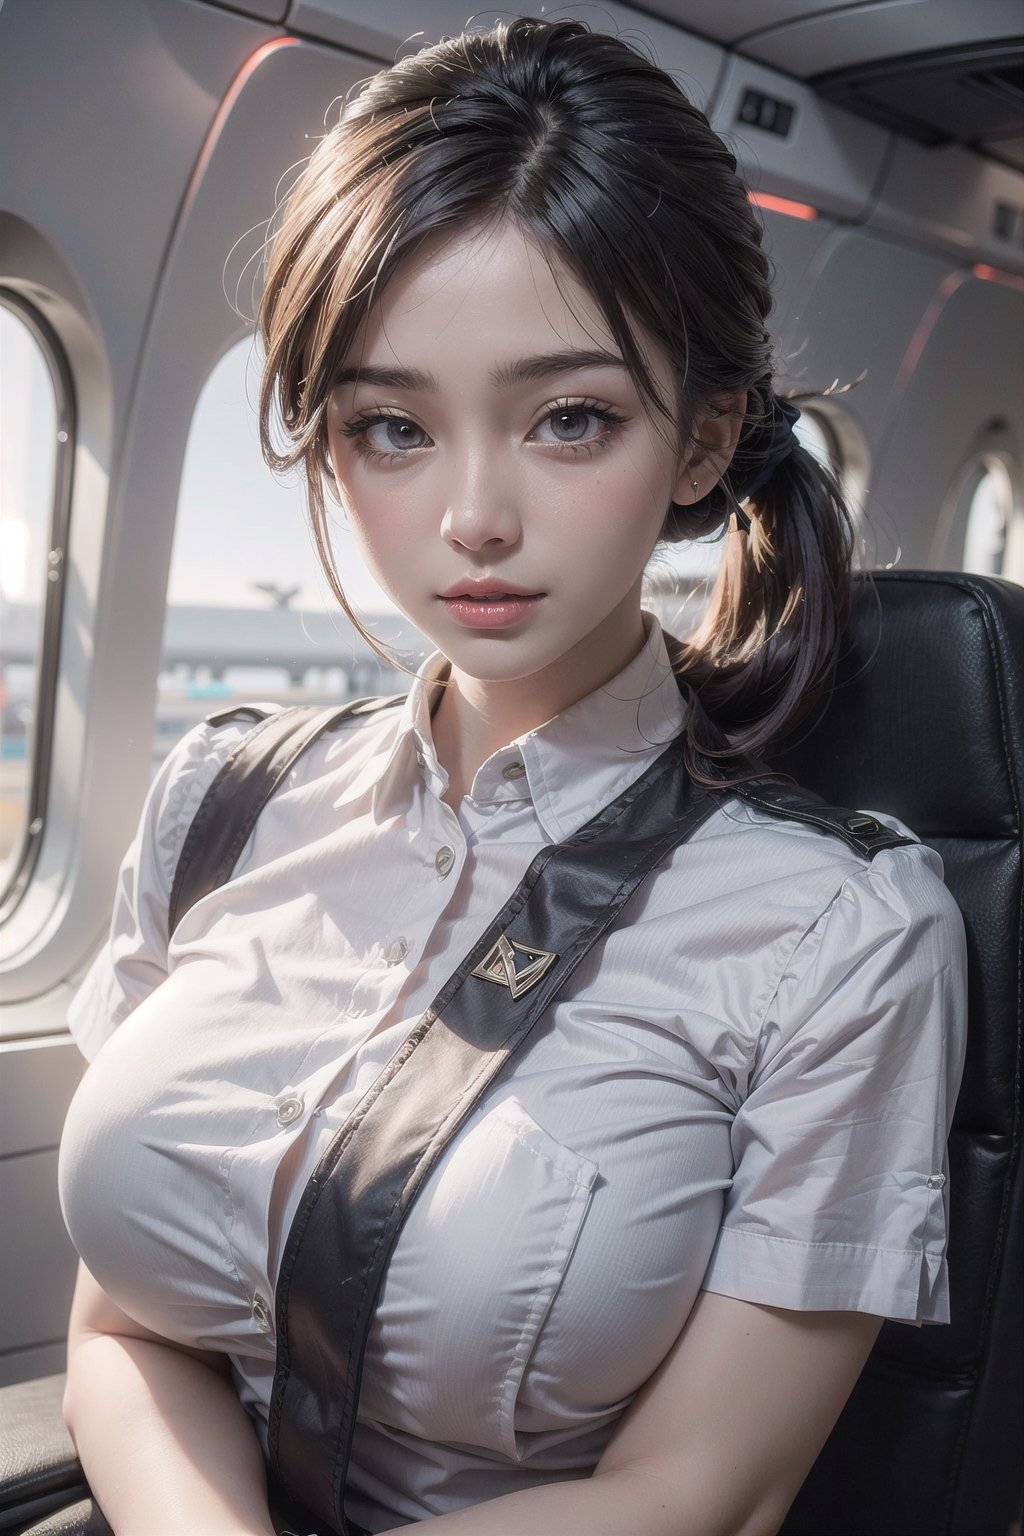 3 24 years old pretty taiwan latin mixed race girl ,pony tail hair, eyes detail,  Airline stewardess uniform,big_breasts,s-shape body ,whole body ,cabin background , Realism, ,Realism,Portrait